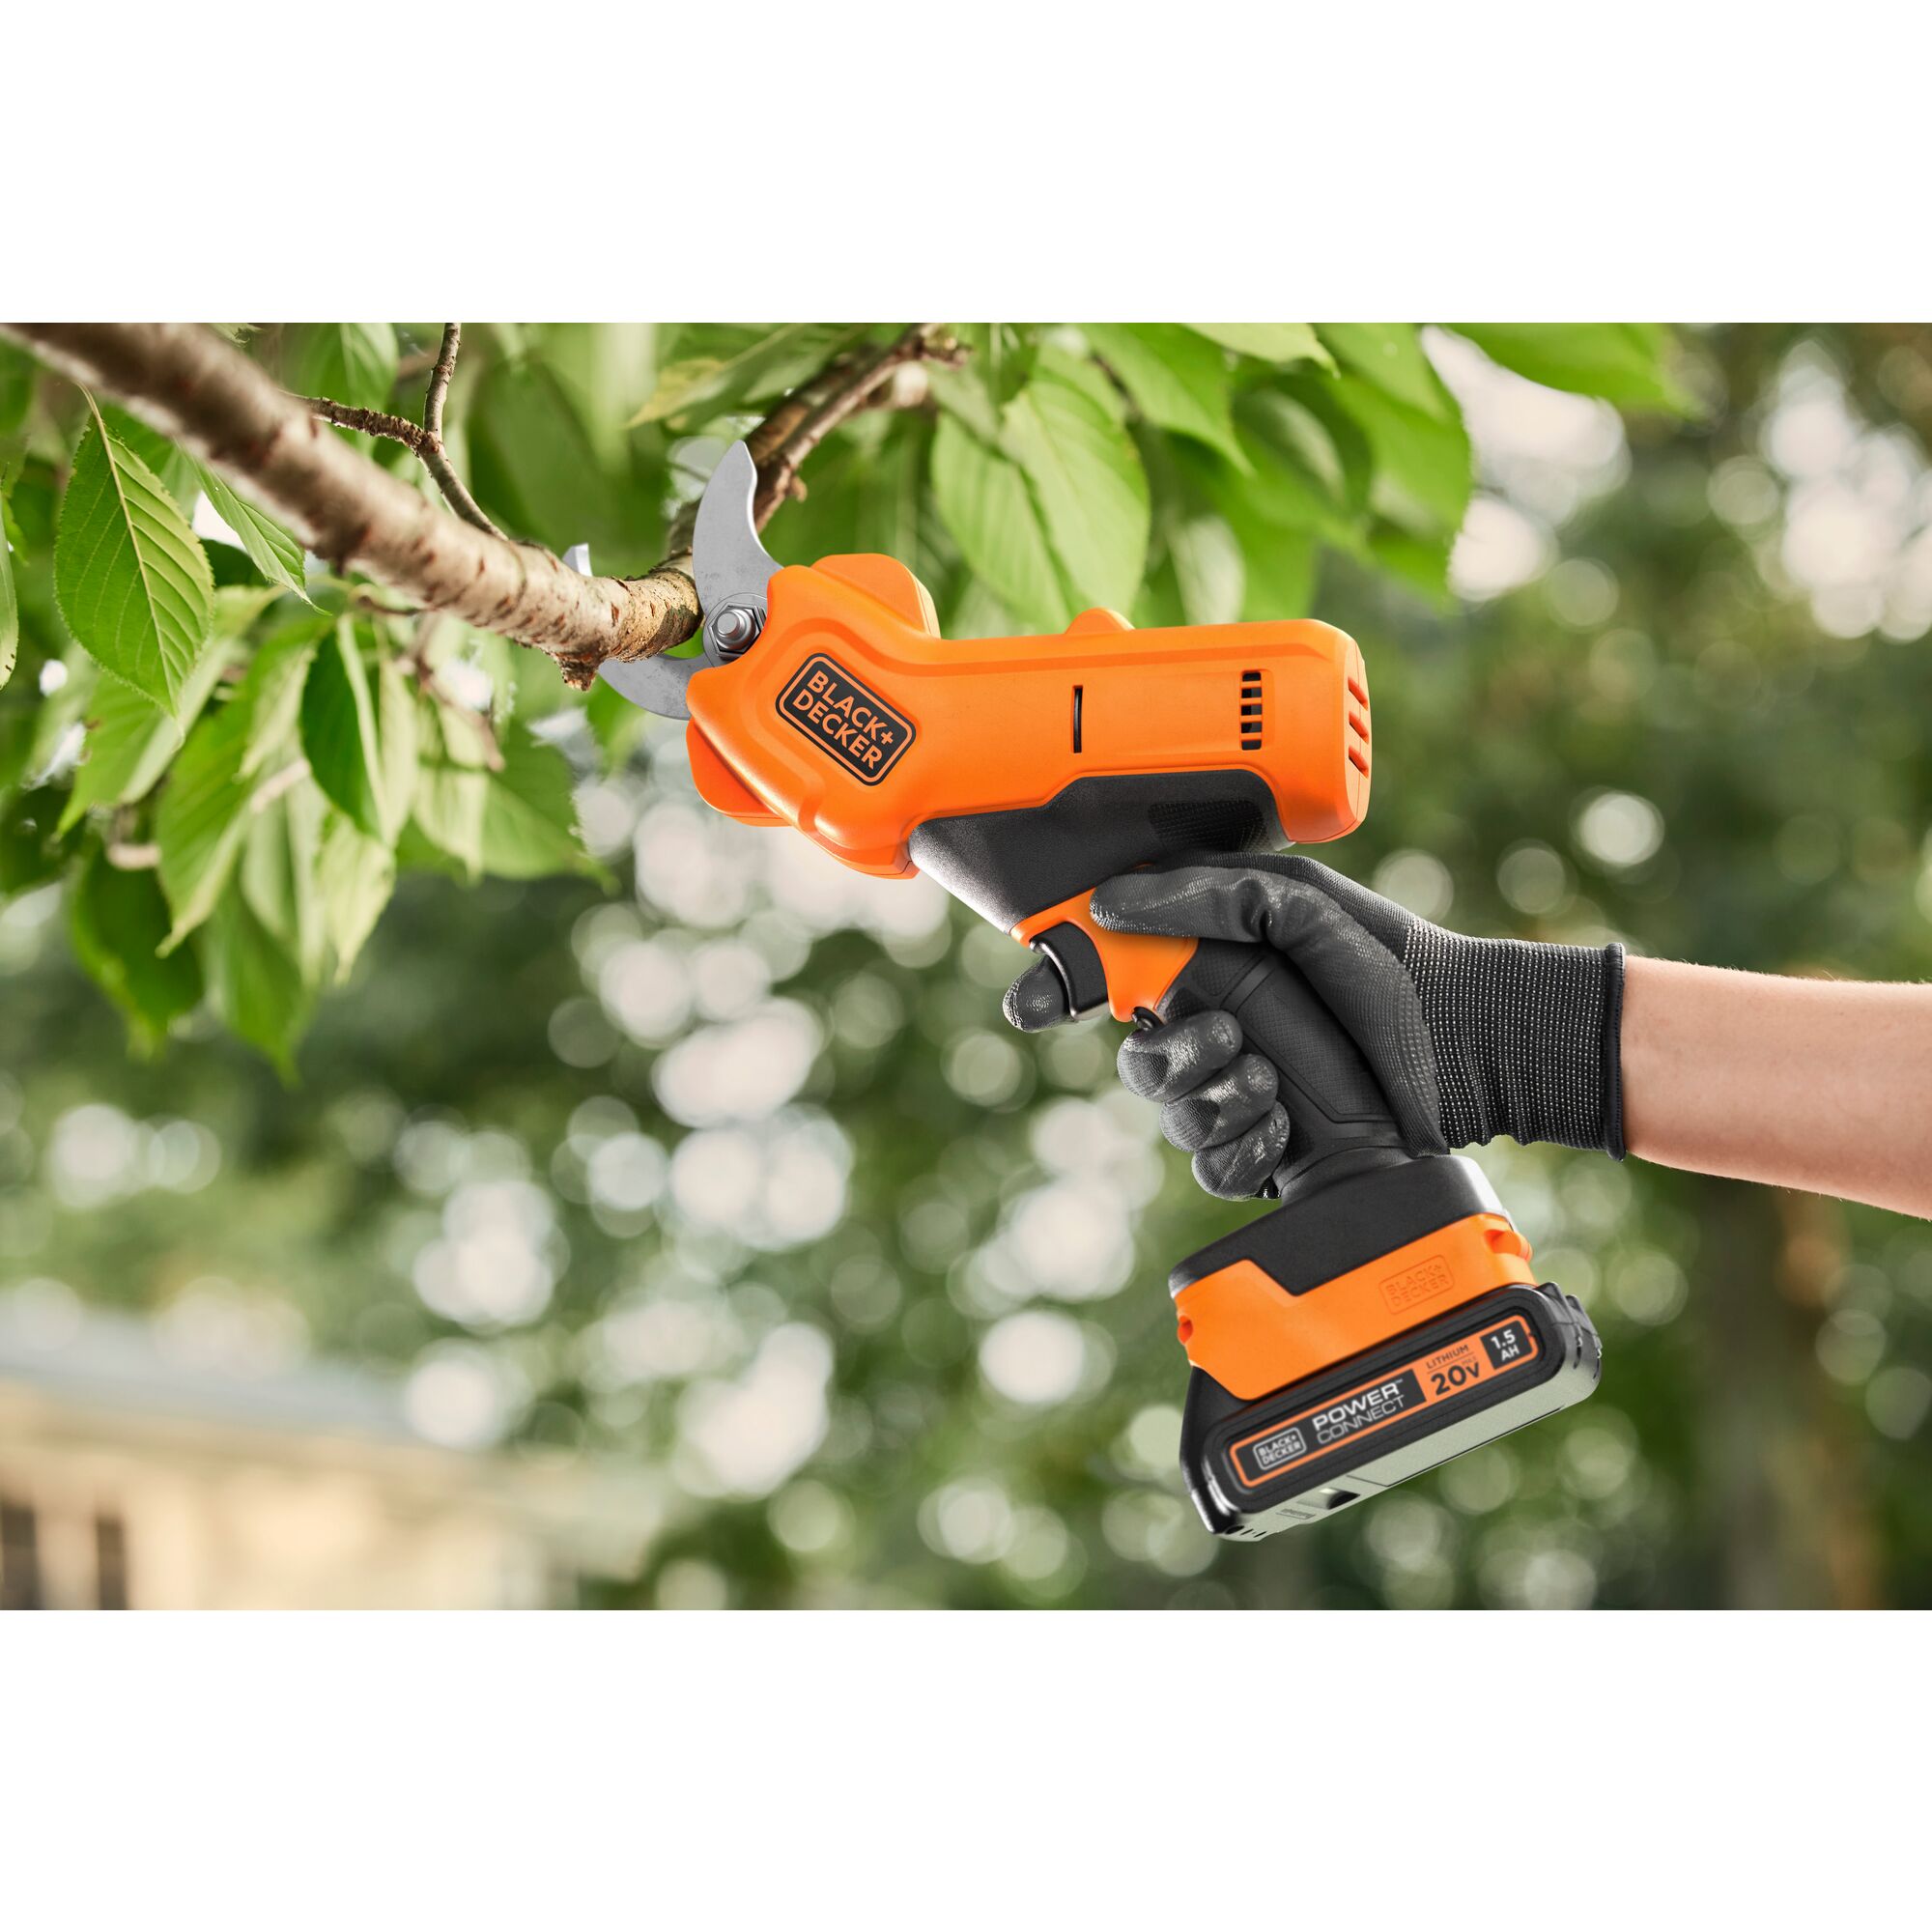 Person using 20V Max Cordless Pruner on a tree branch